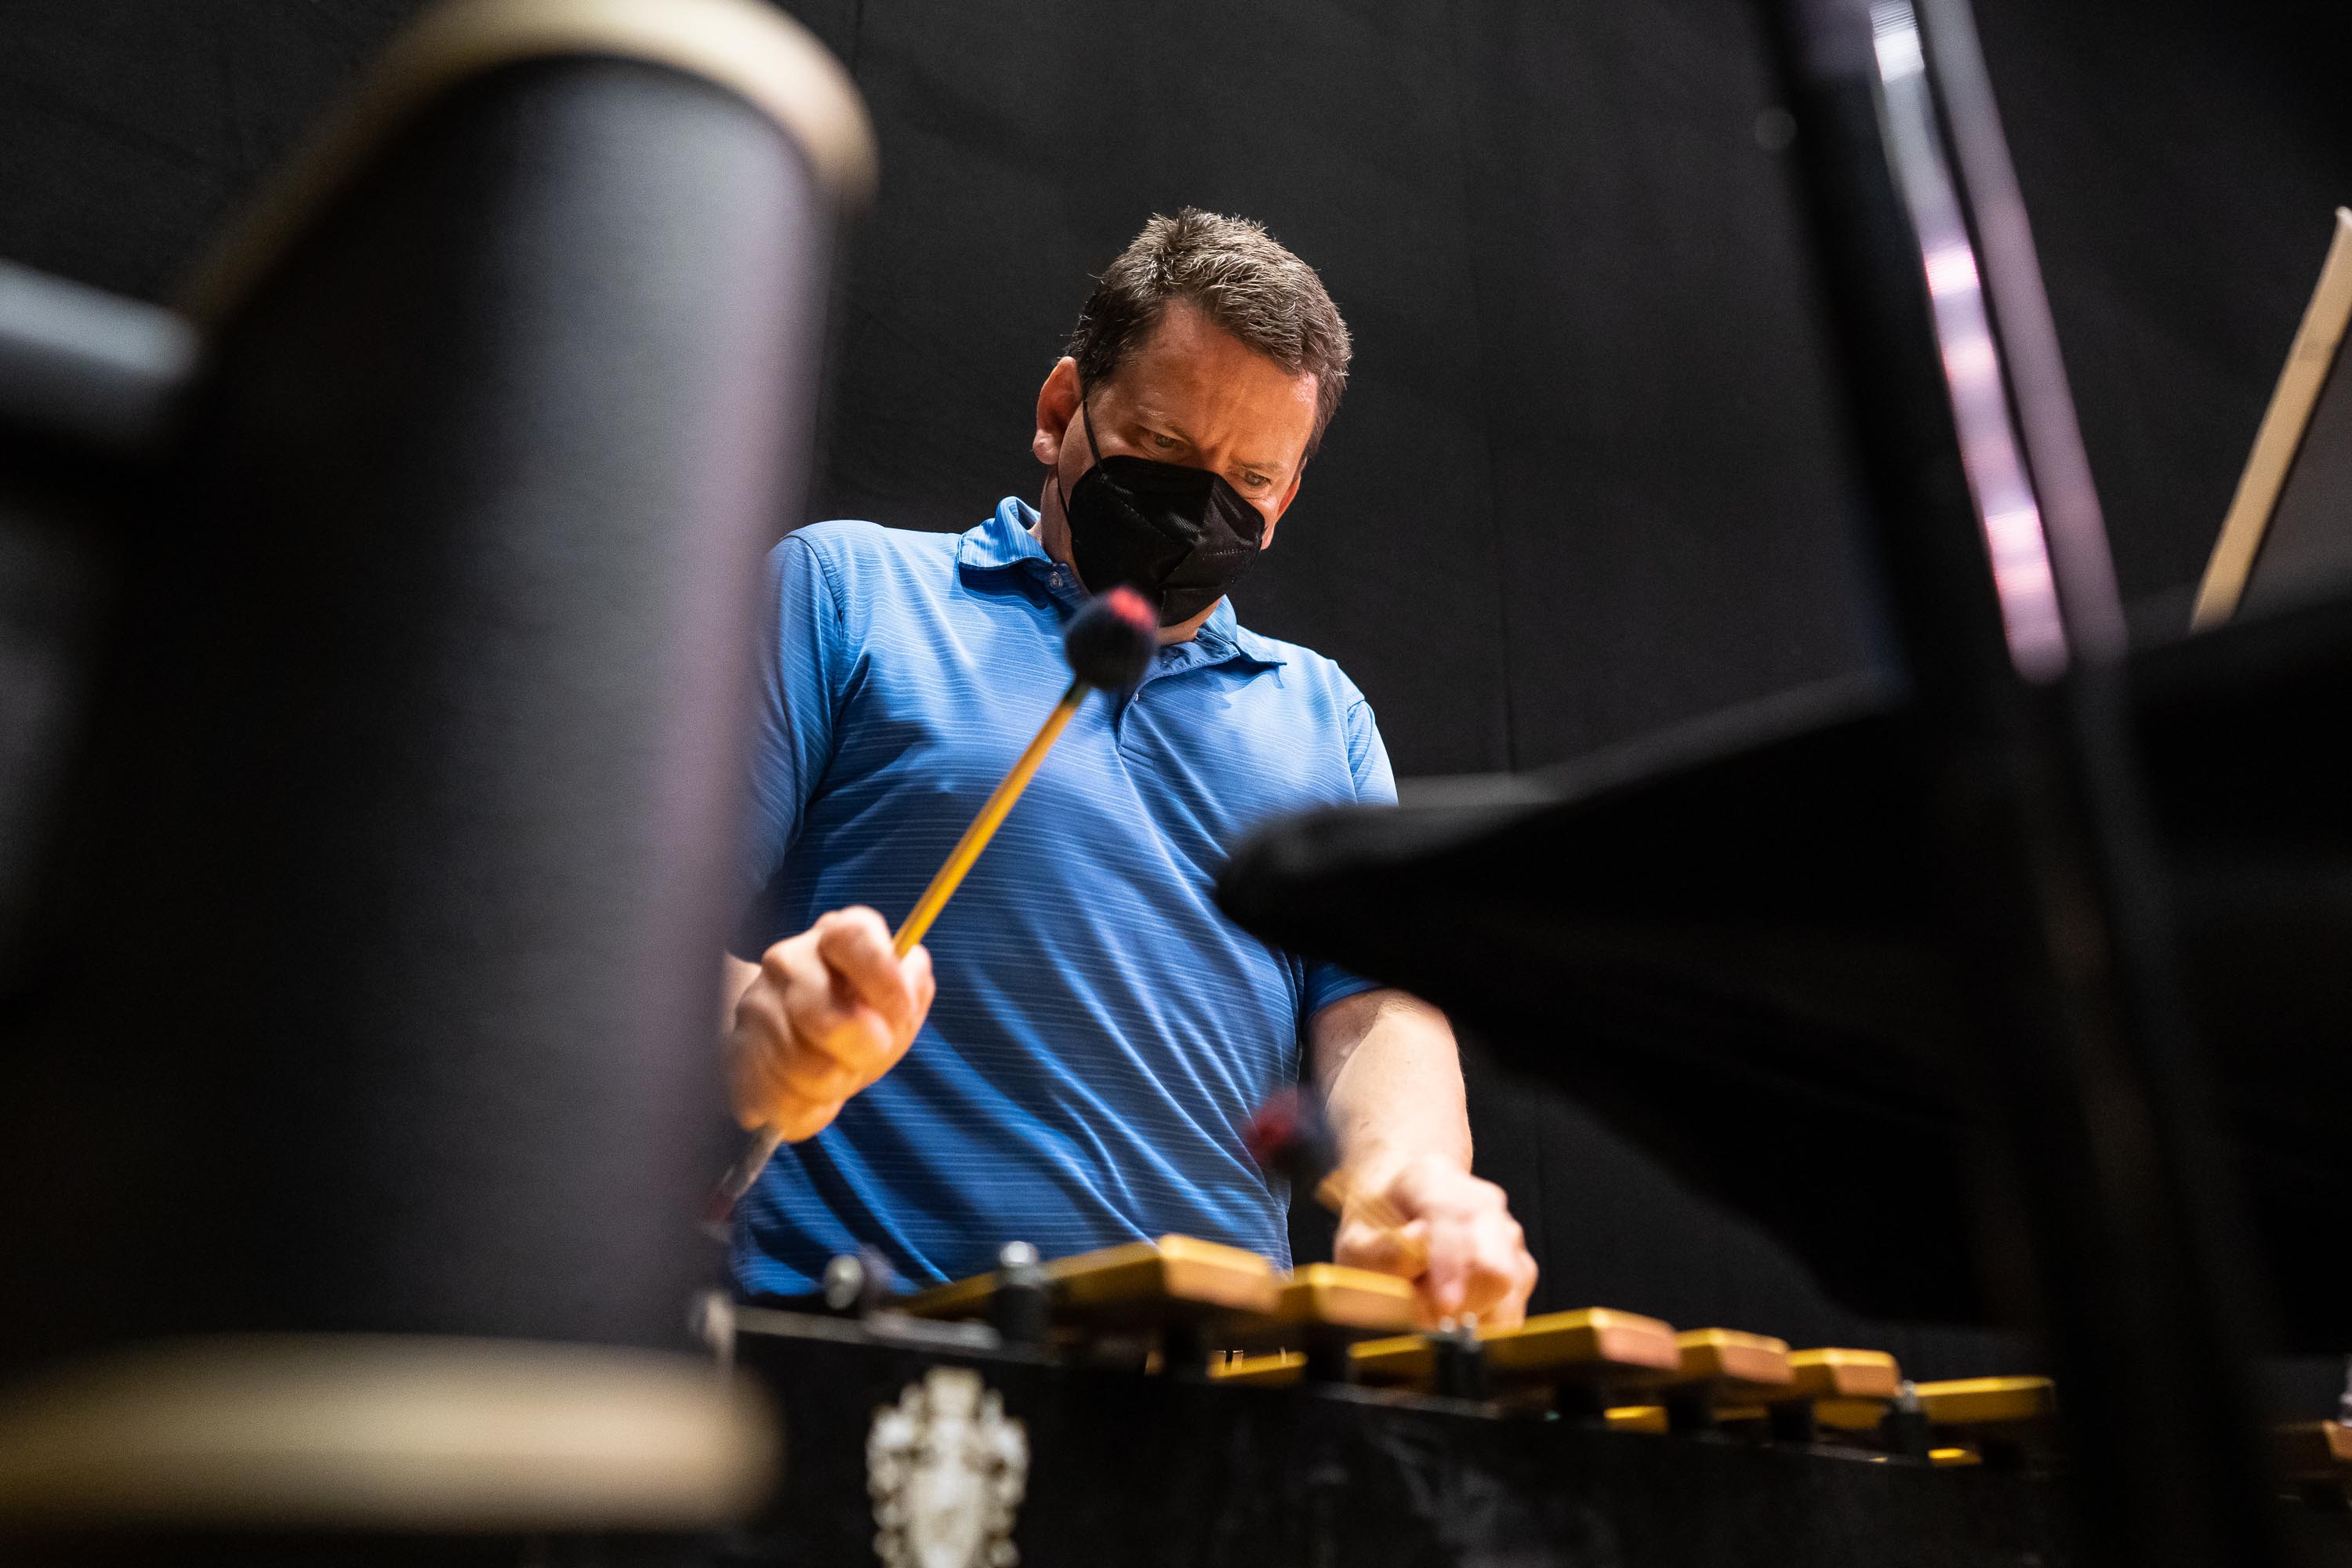 Principal Percussion Christopher Deviney’s sharp focus is apparent during rehearsal